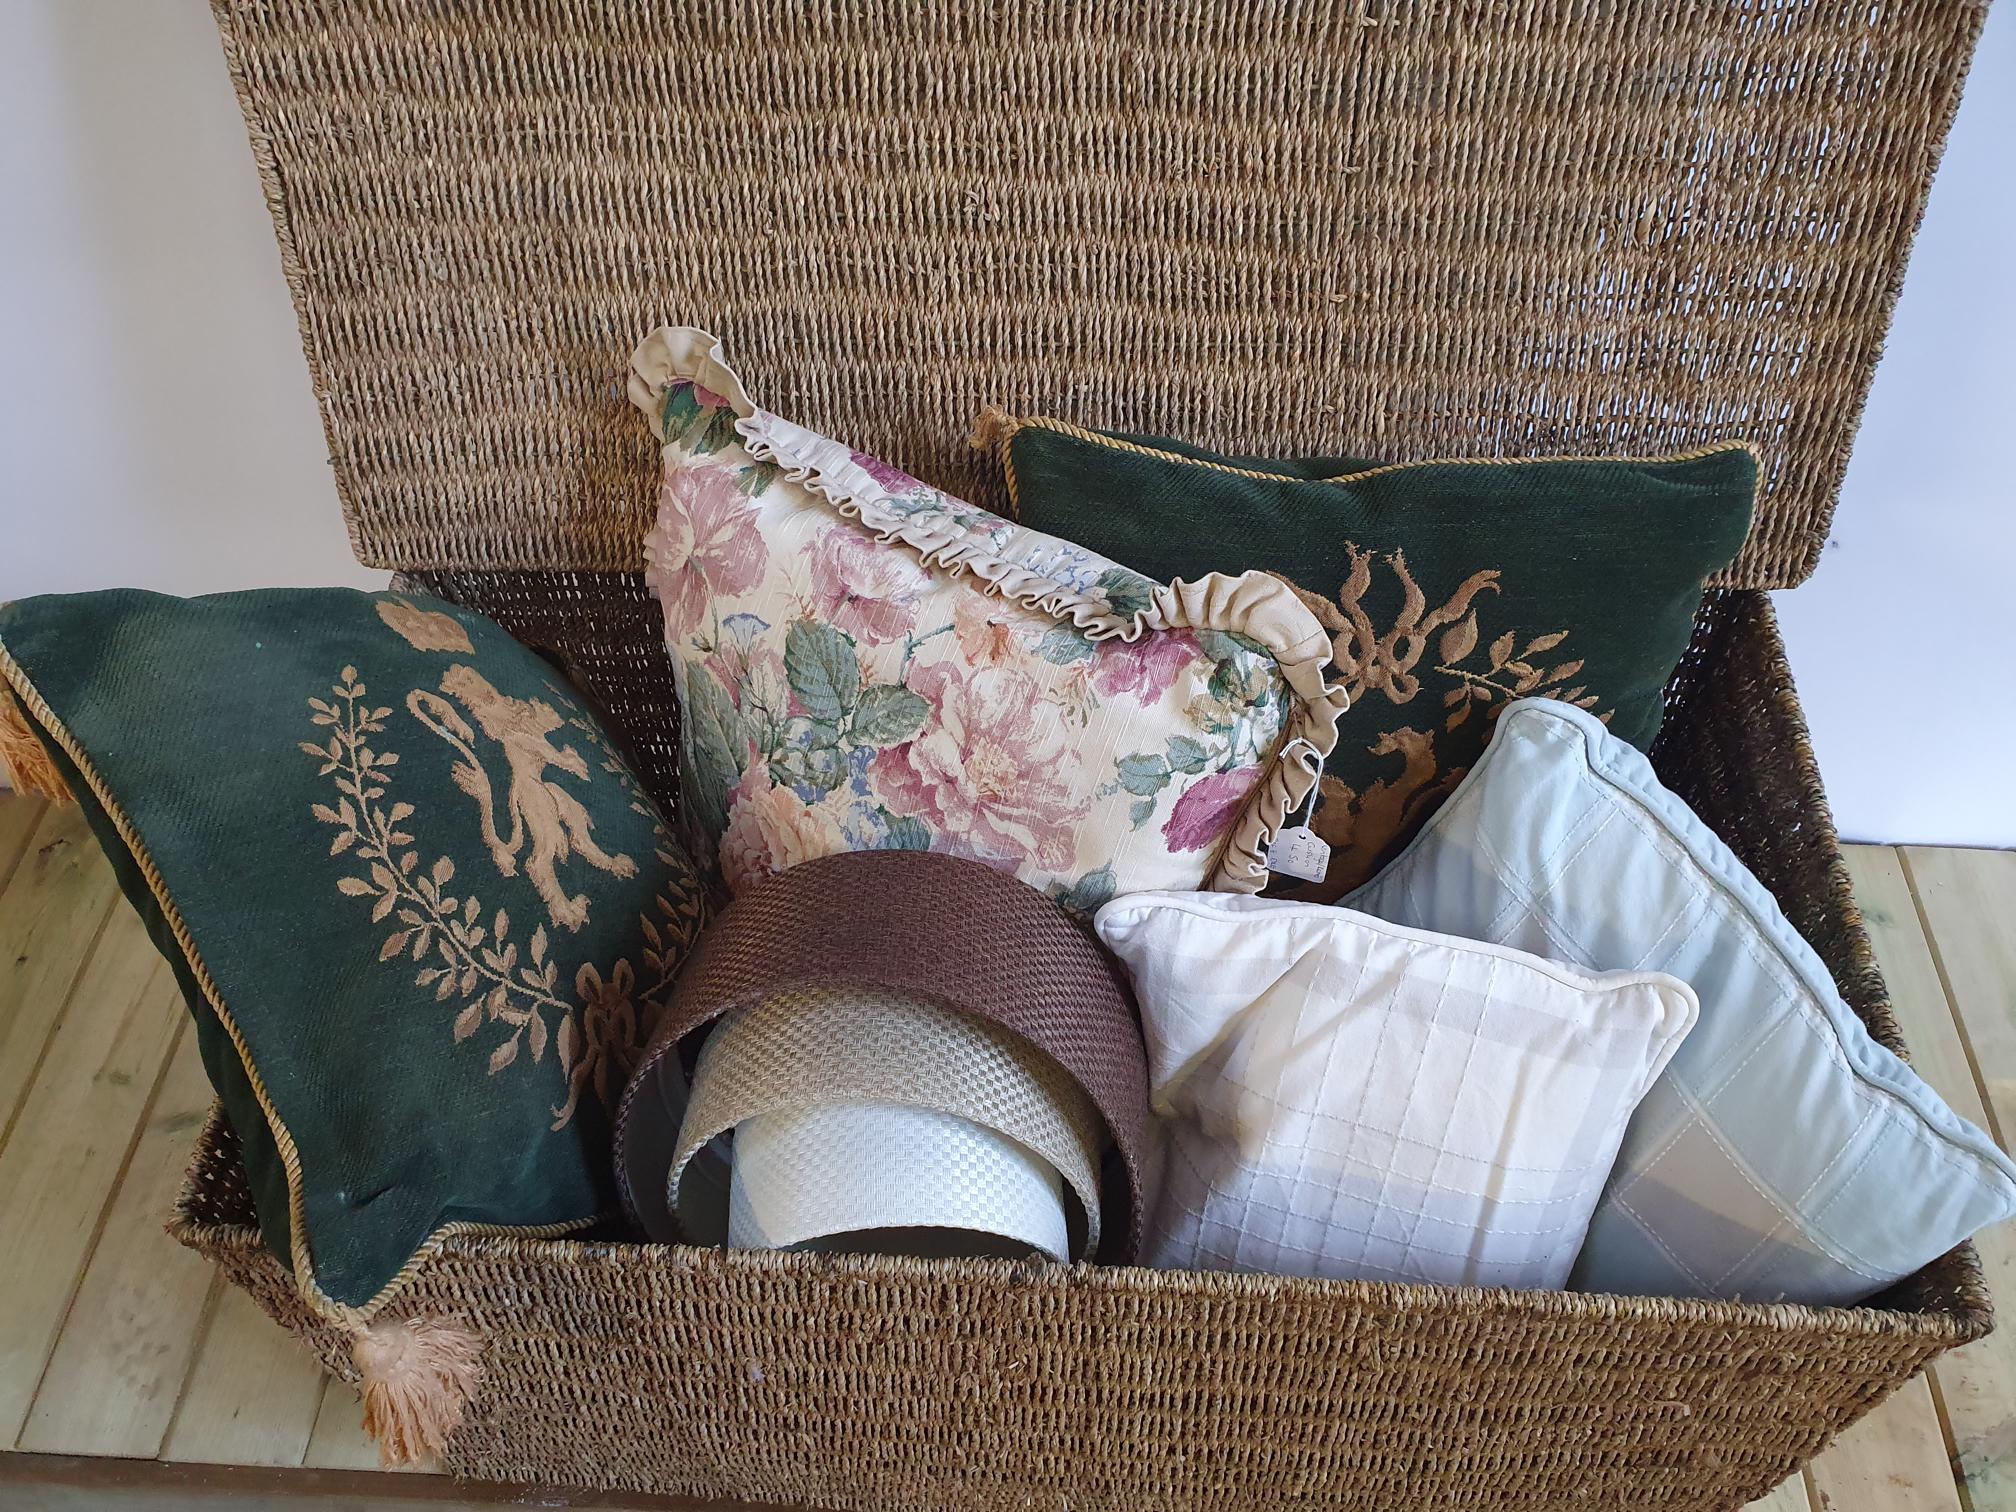 Wicker Basket and Contents - Image 2 of 2